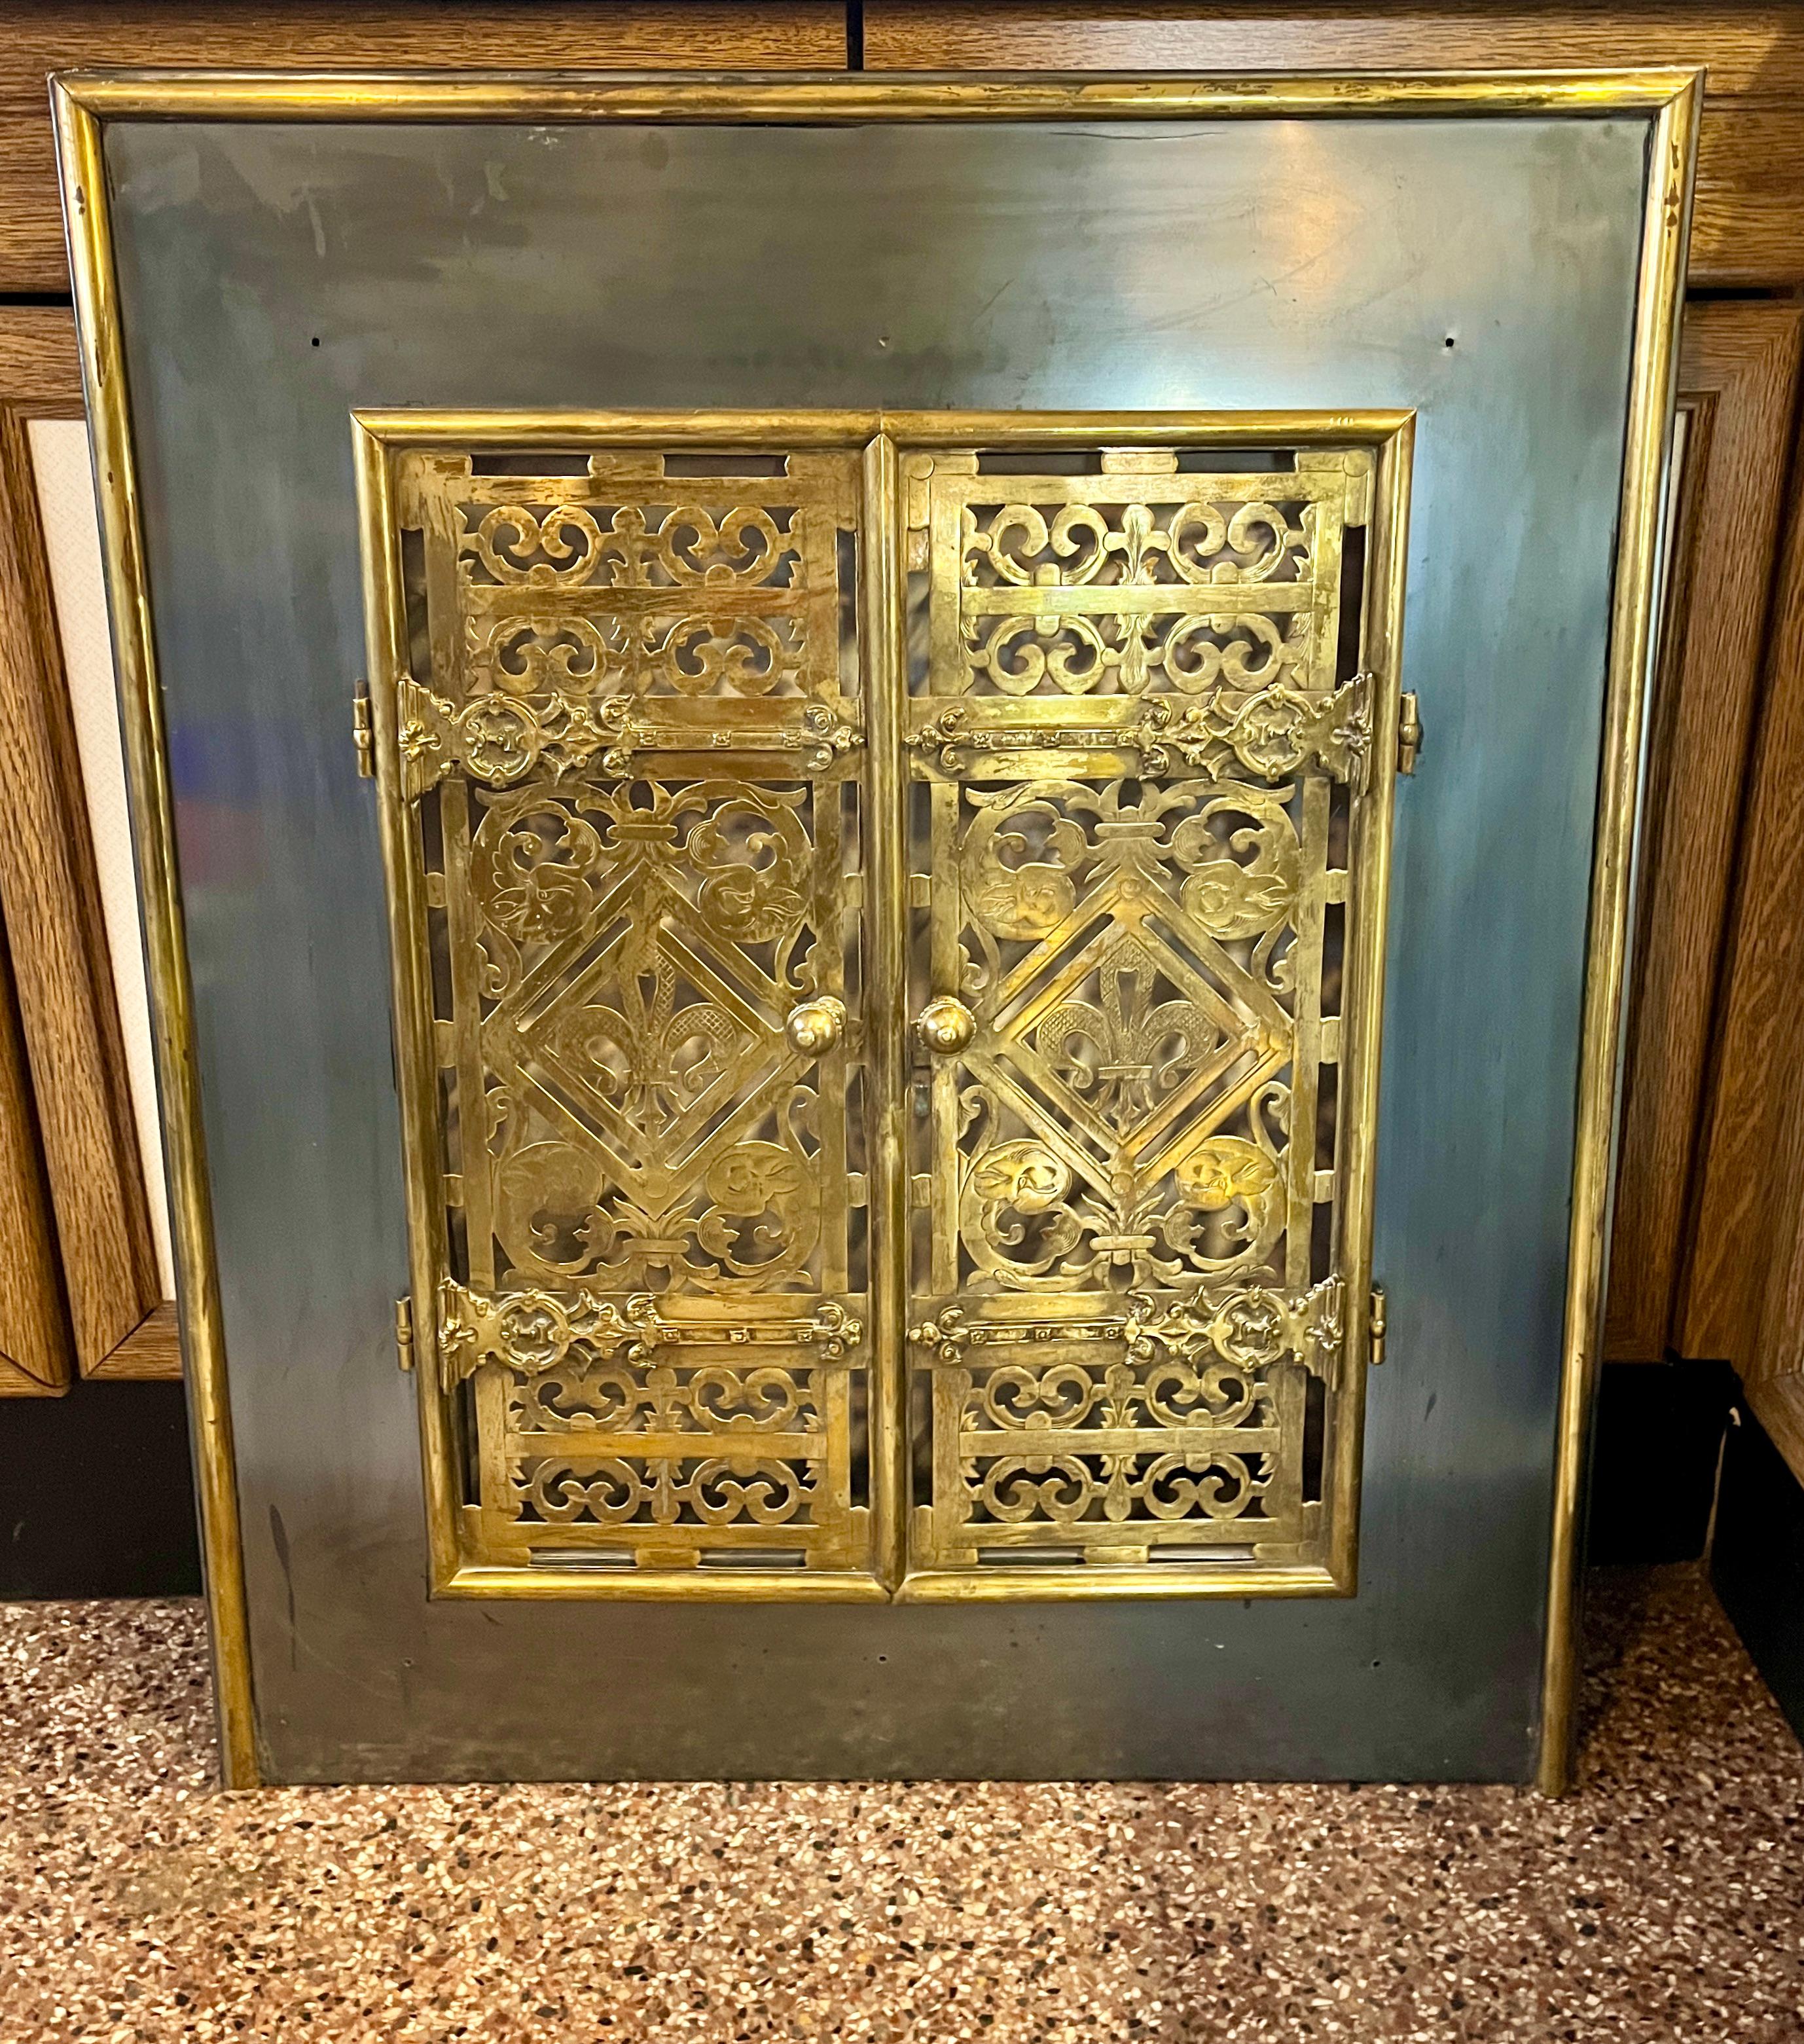  iron and brass circa 1920

 iron and brass and terminating on decorative scrolled stylized Doors

We prefer to sell our items in 'uncleaned' condition so that the new owner 
still has the choice to remove the patina (signs of age) or